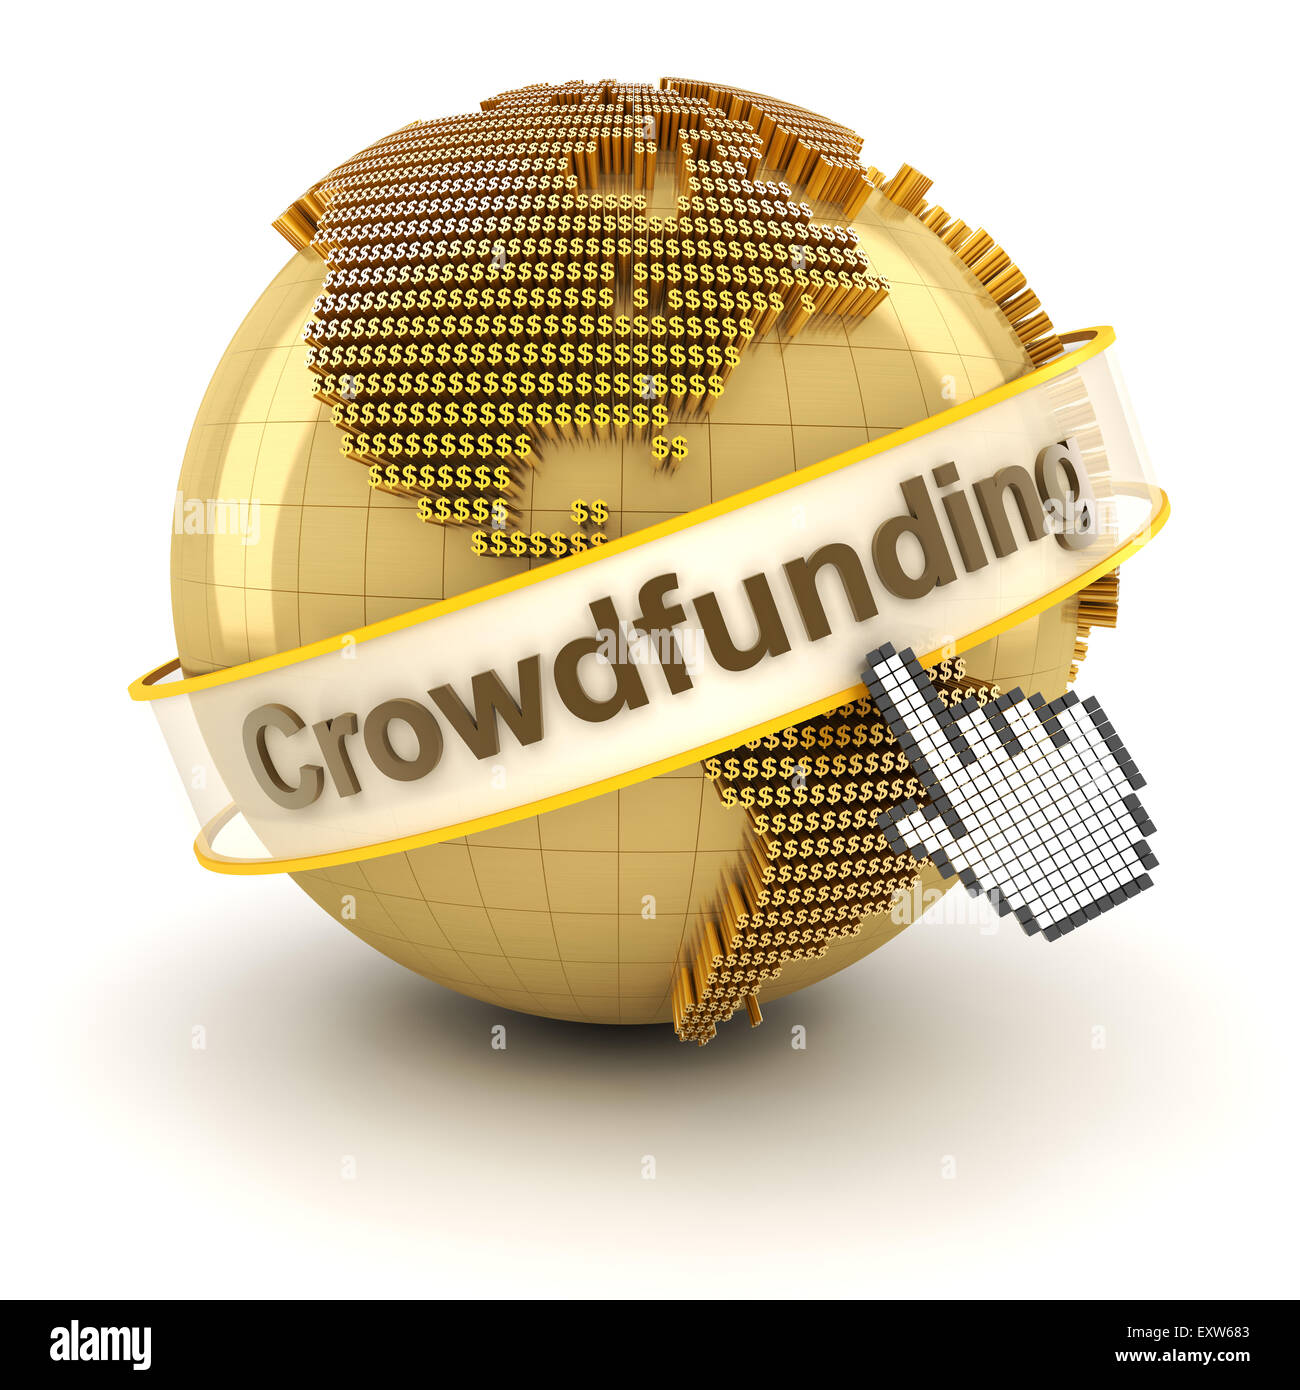 Crowdfunding symbol with globe formed by dollar signs, 3d render Stock Photo